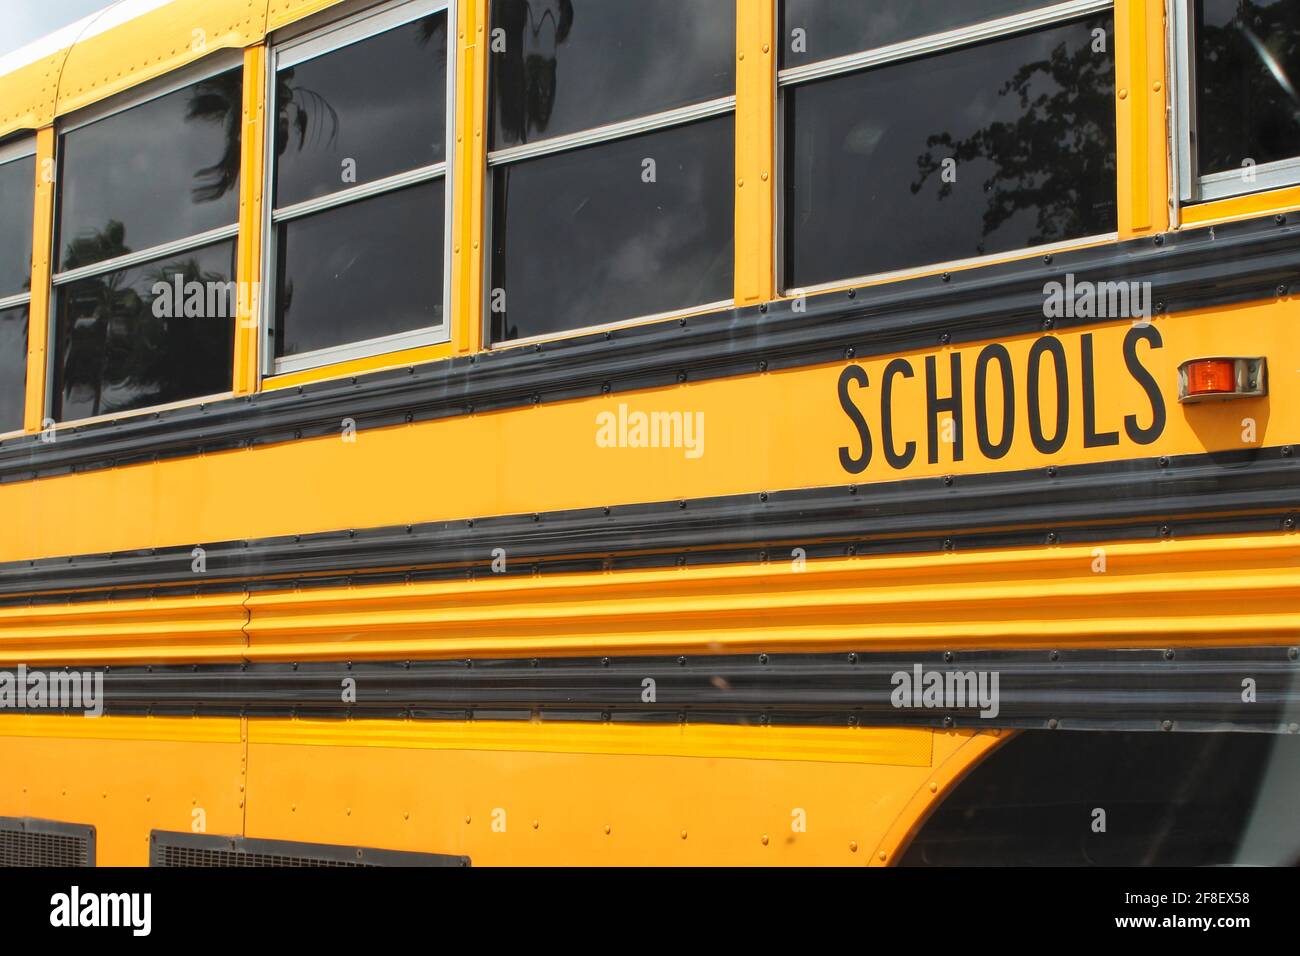 Yellow school bus from a county public school system parked in a parking lot Stock Photo